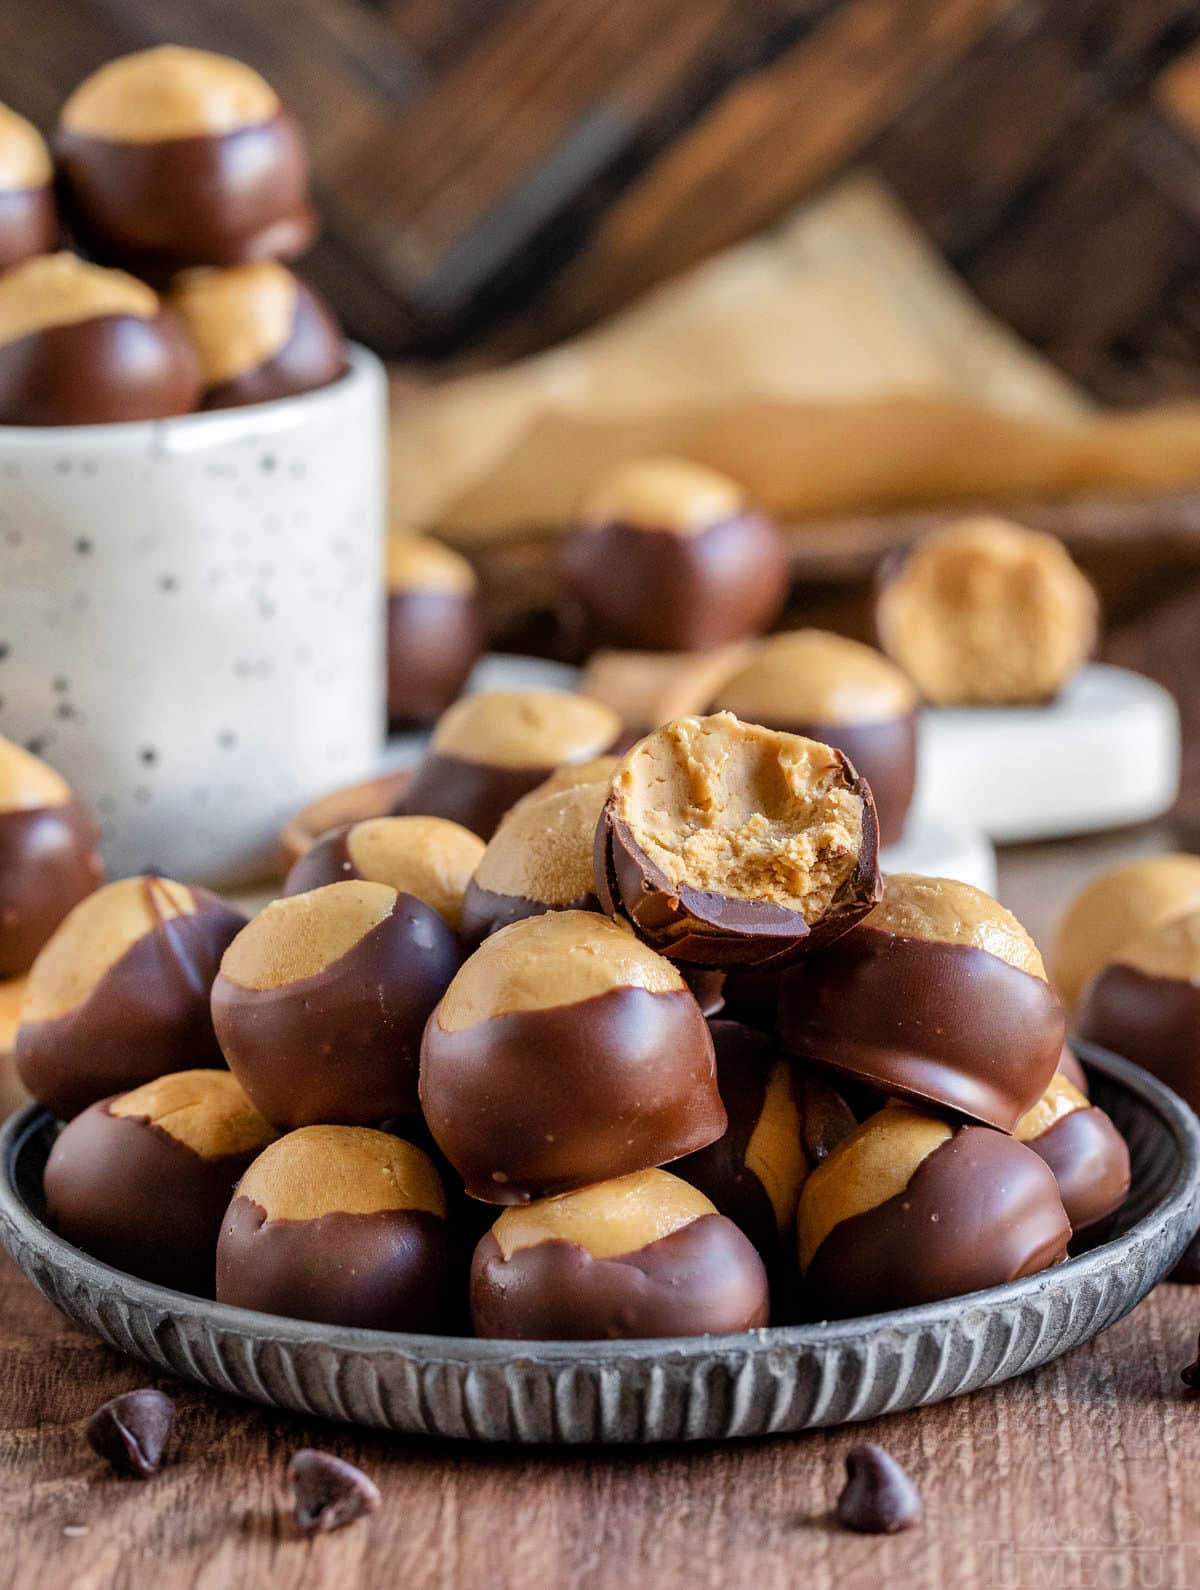 buckeyes on a silver plate with one of the candies having a bite taken, and also in a white mug. more candies are scattered about.